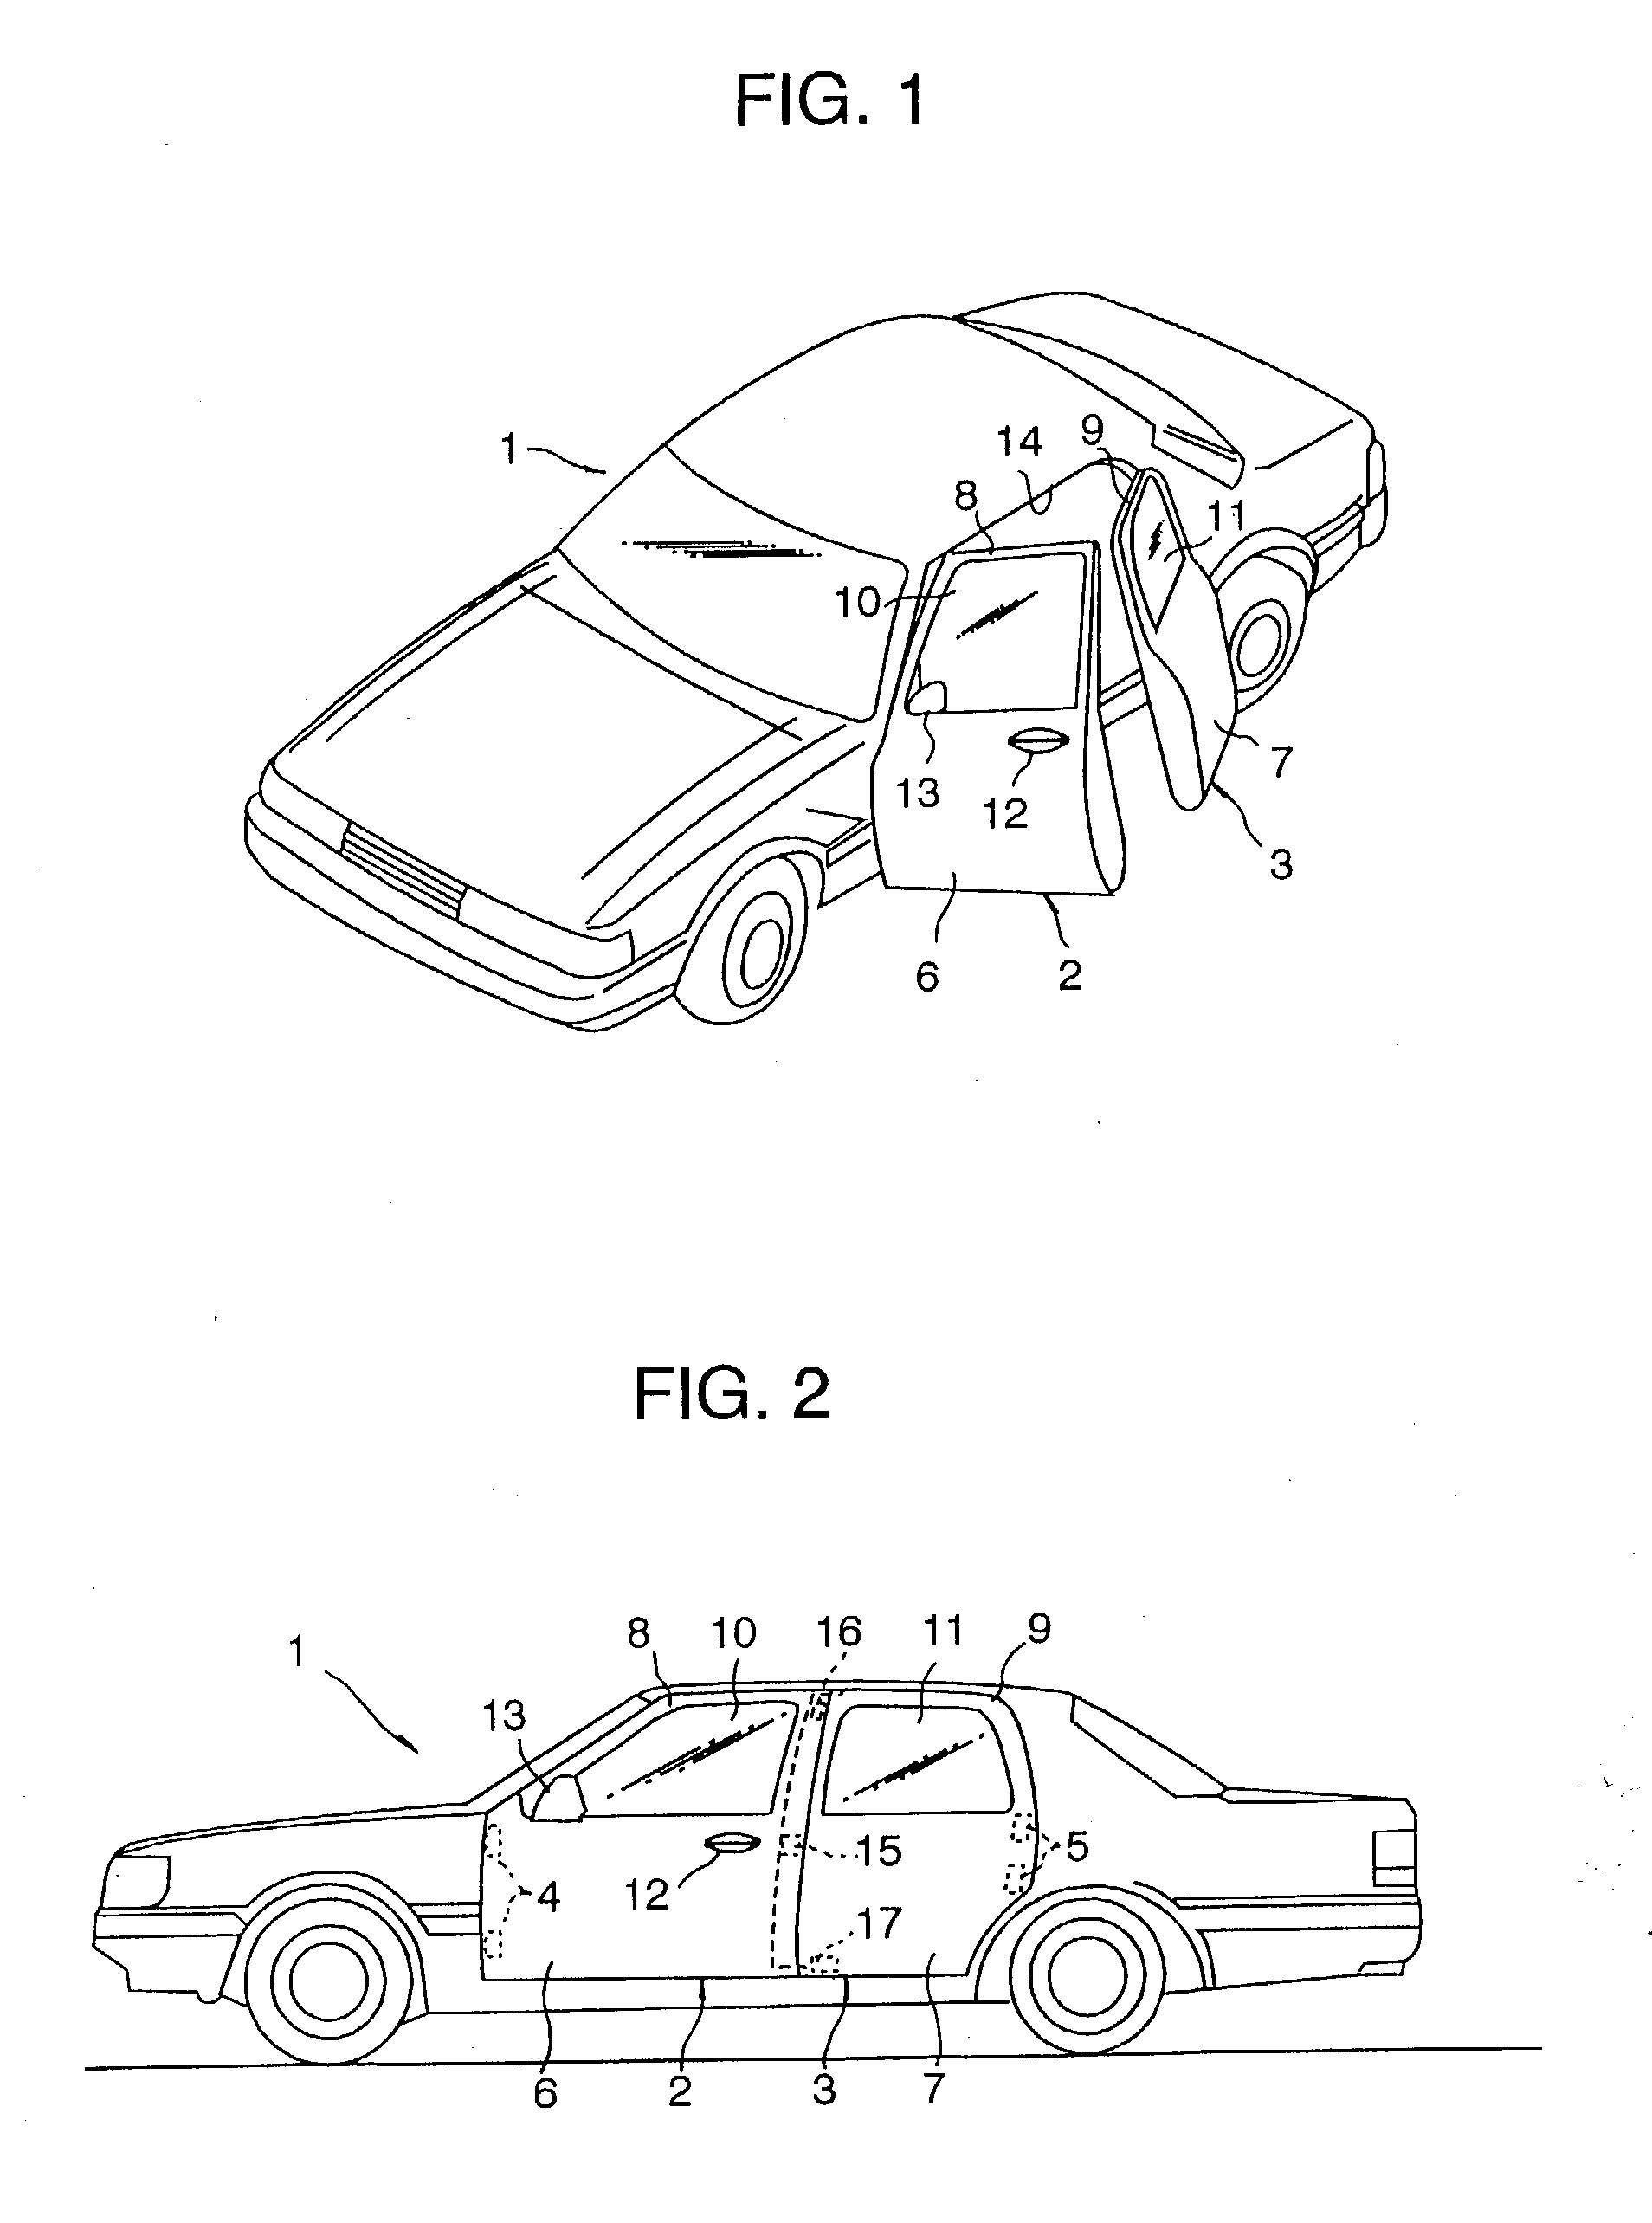 Front seatbelt system for vehicle